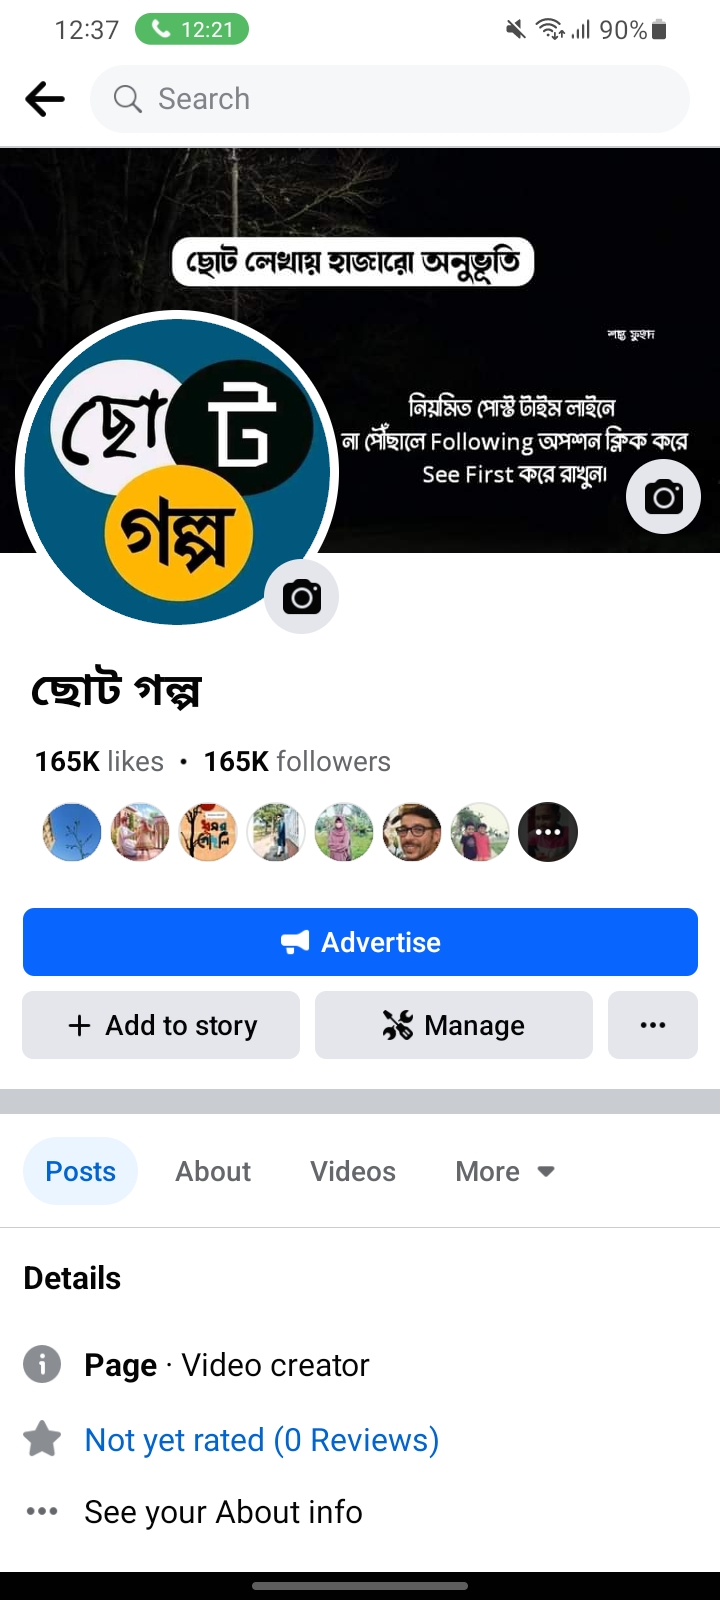 13370019k Like Agun Active BD Page Sell hbe